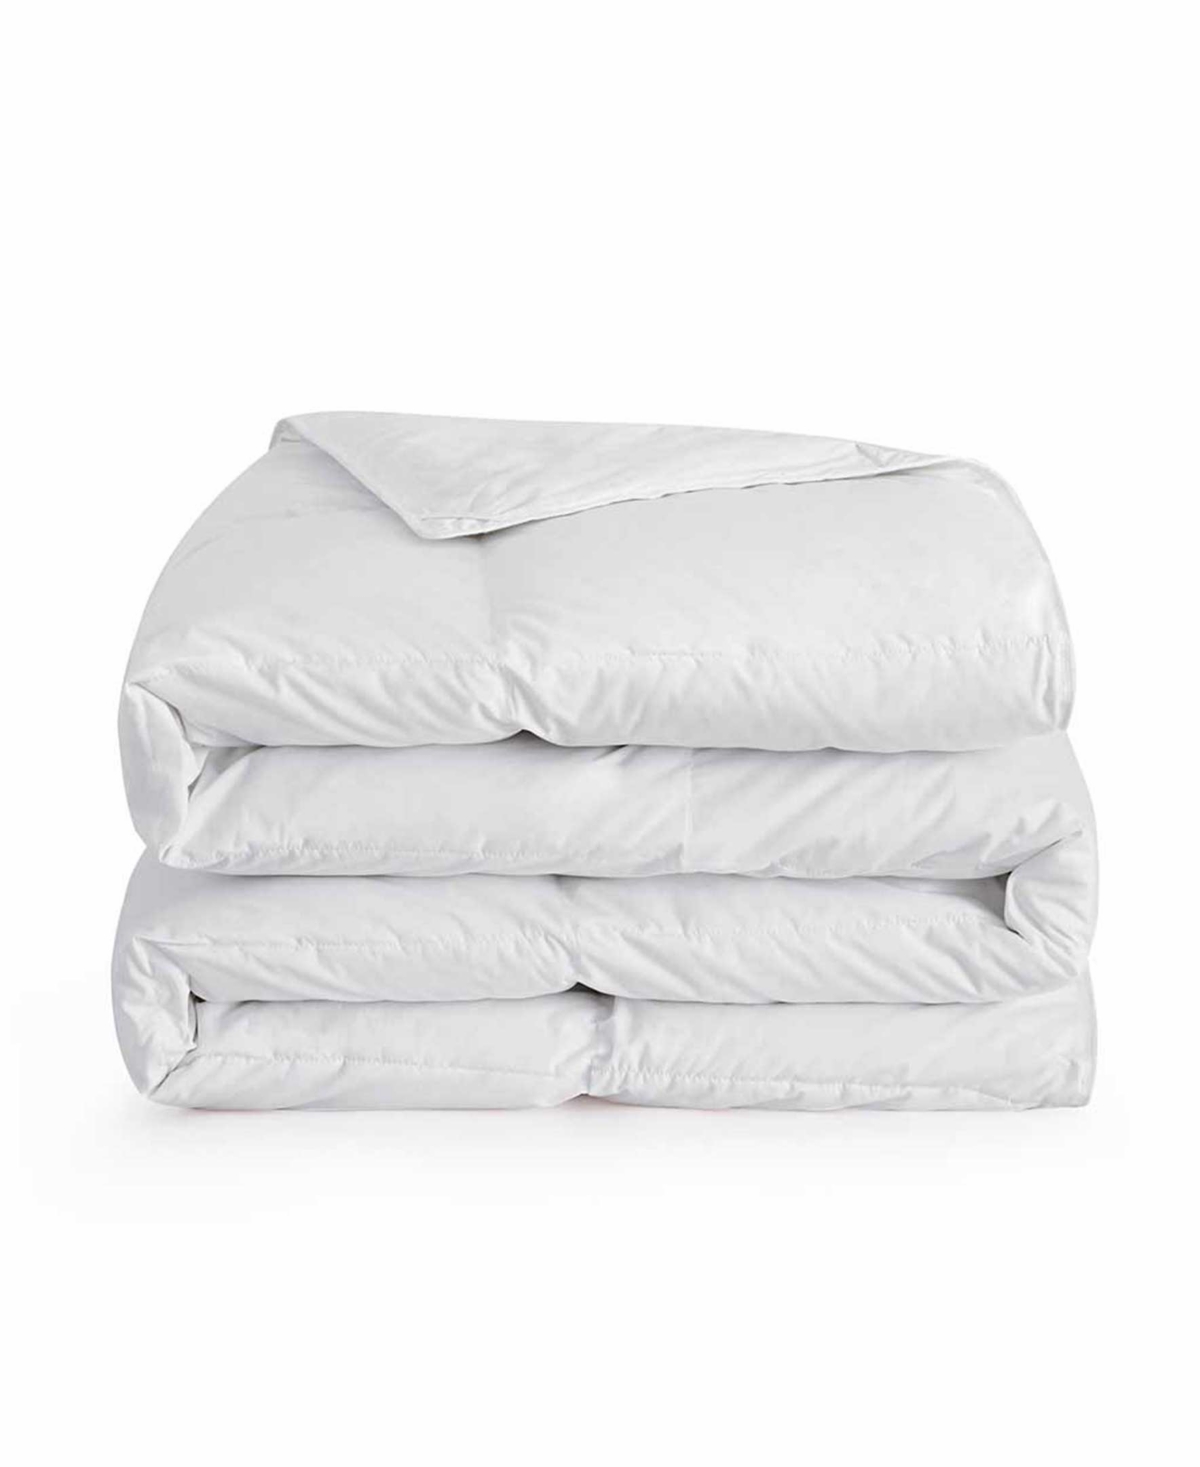 Unikome Cotton Fabric Lightweight Goose Feather Down Comforter, King In White